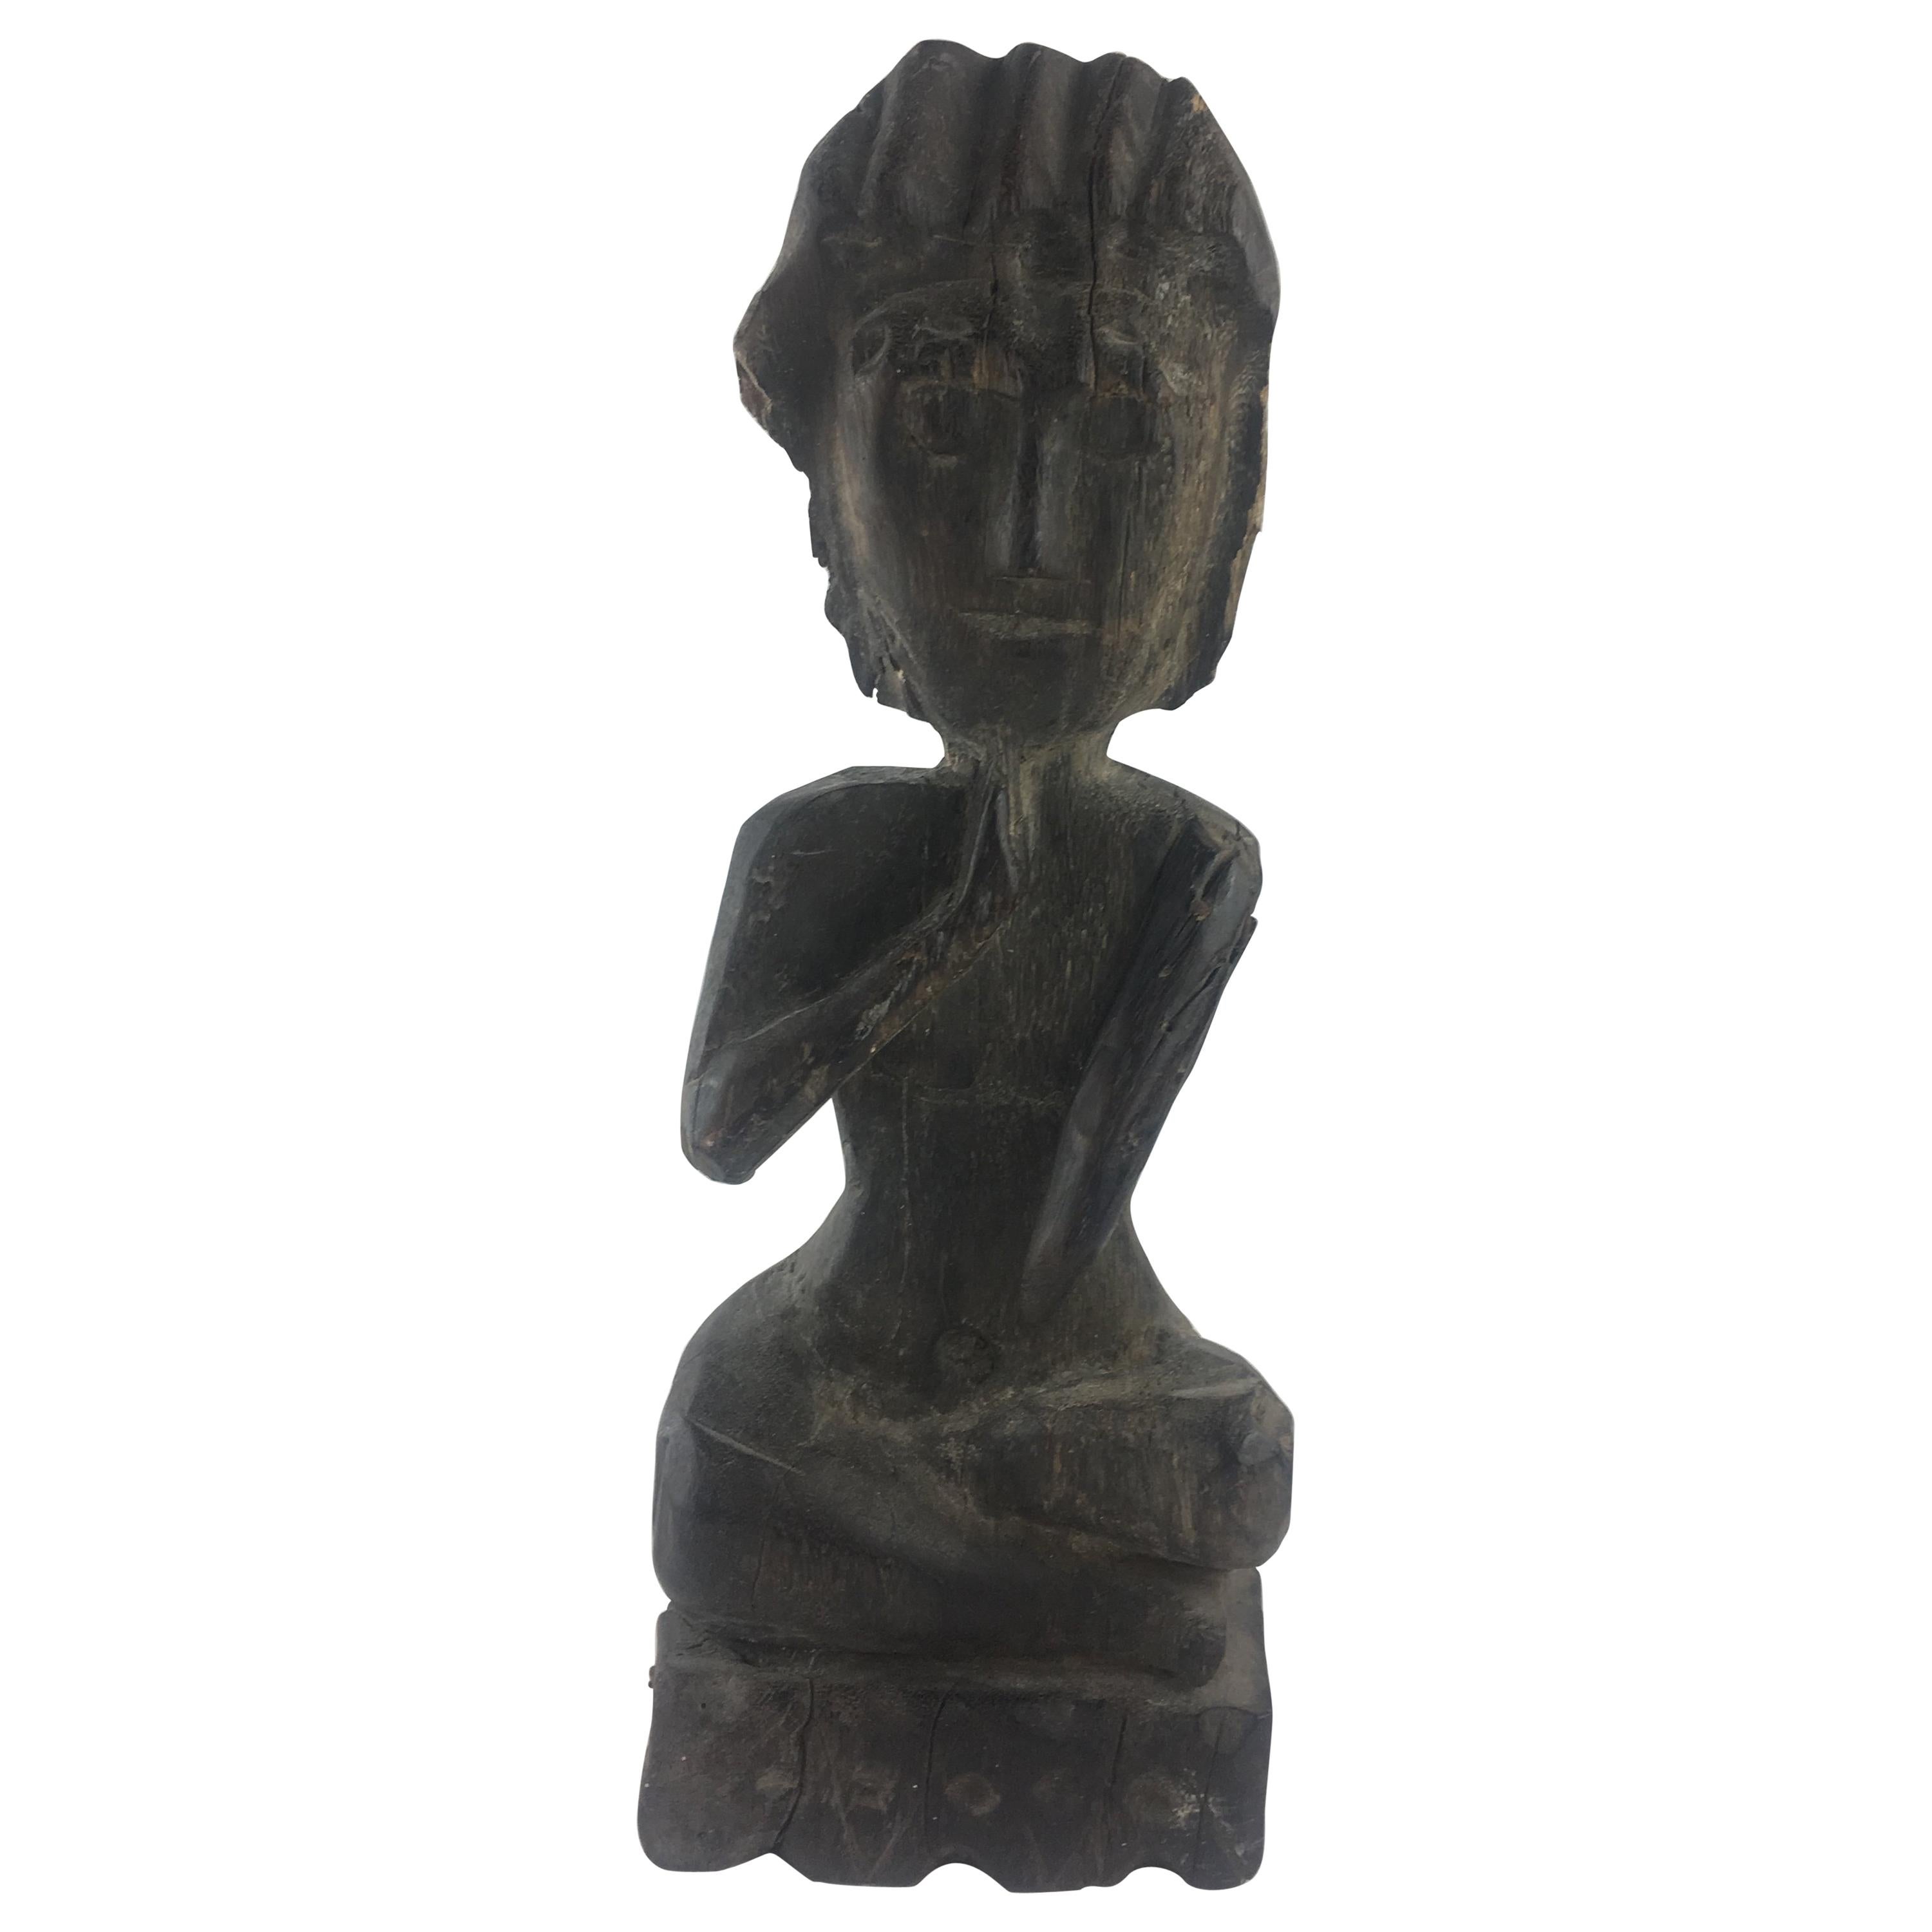 Hand Carved Wooden Balinese Yoga or Meditation Statue